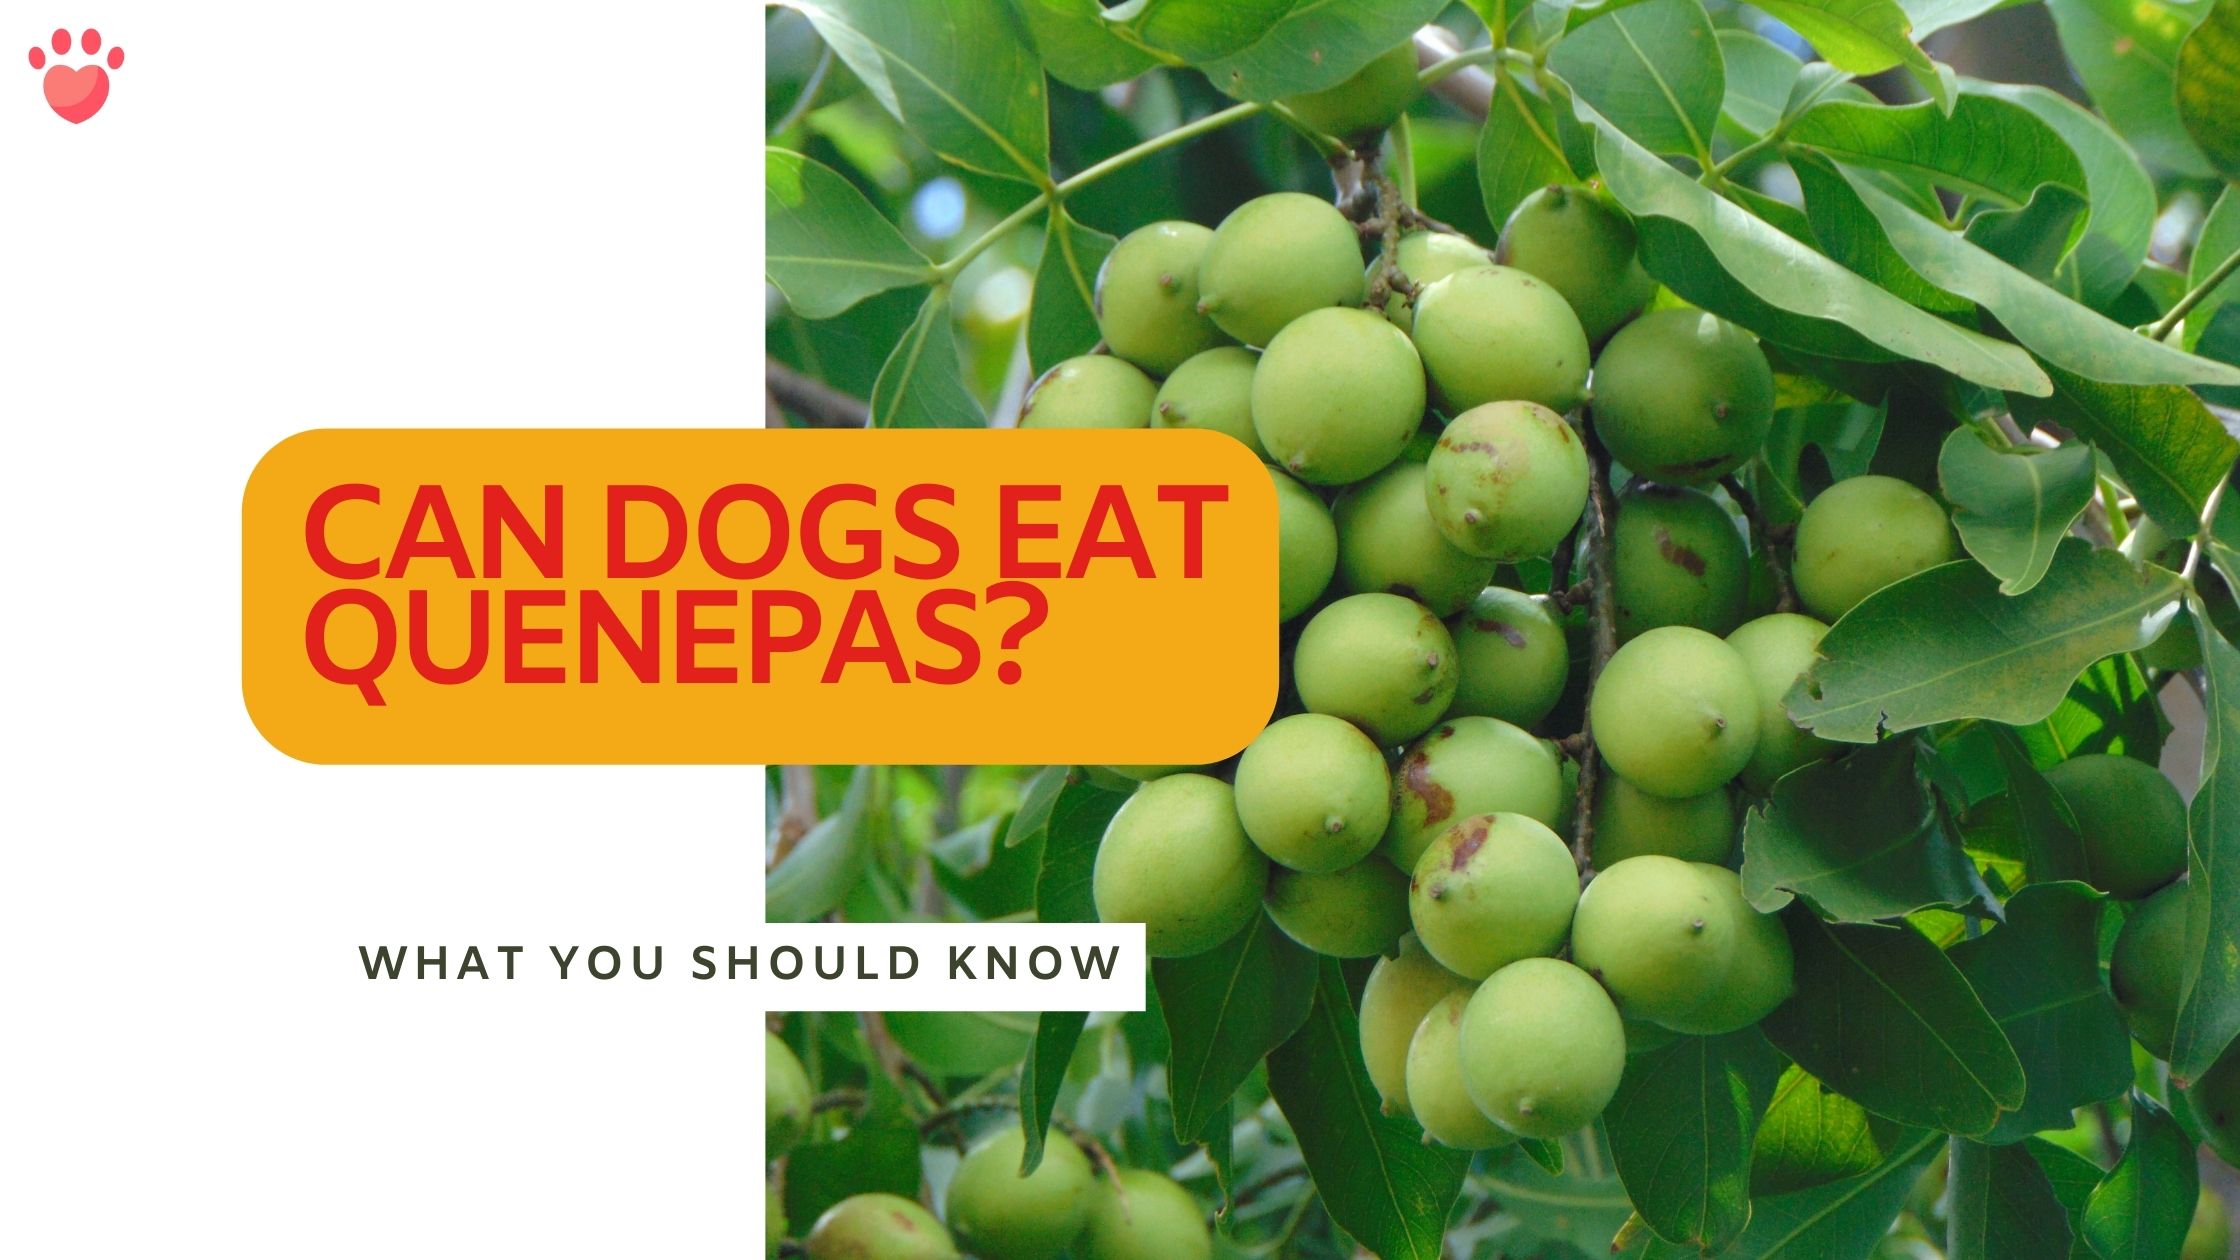 Can dogs eat Quenepas